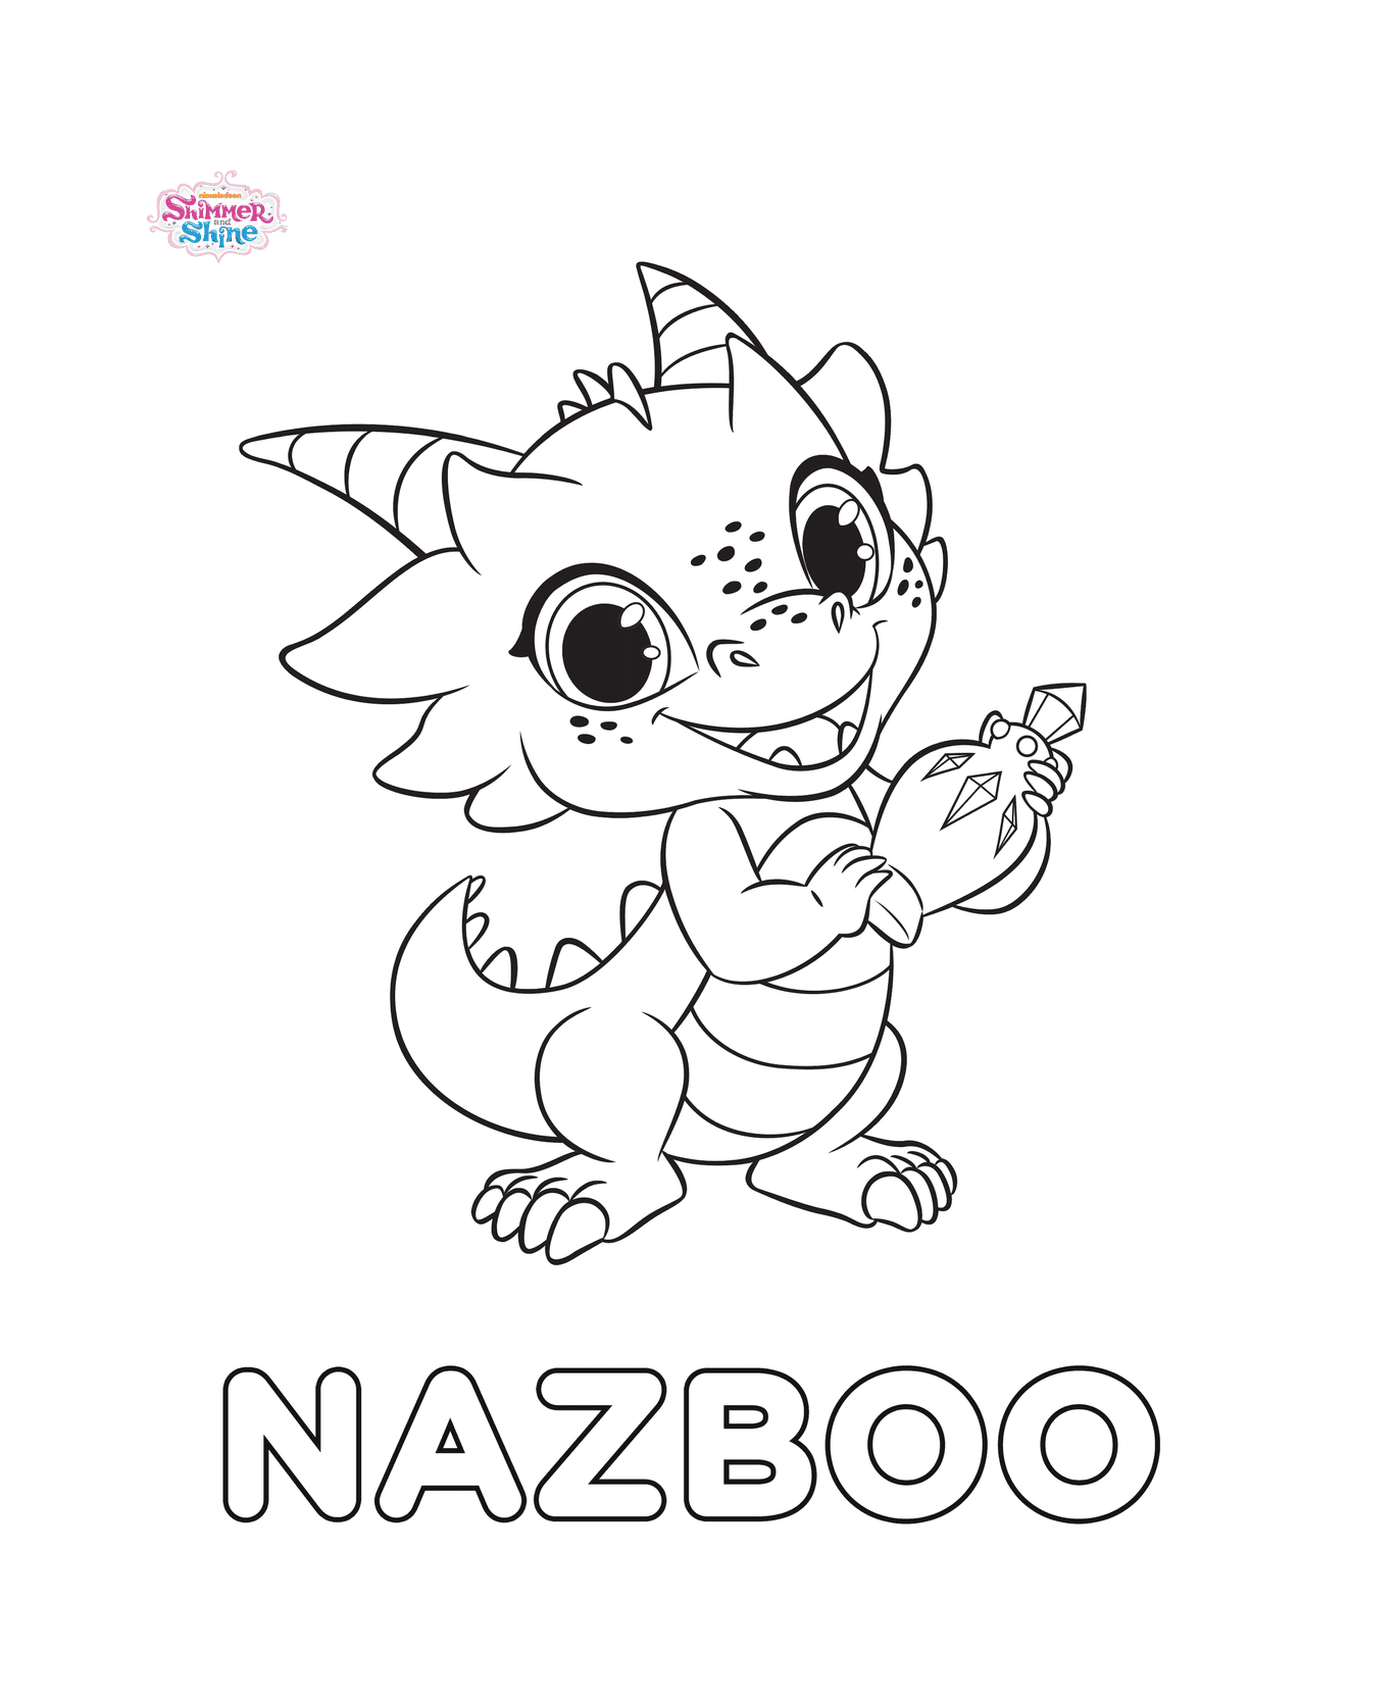  Nazboo from Shimmer and Shine holding something 